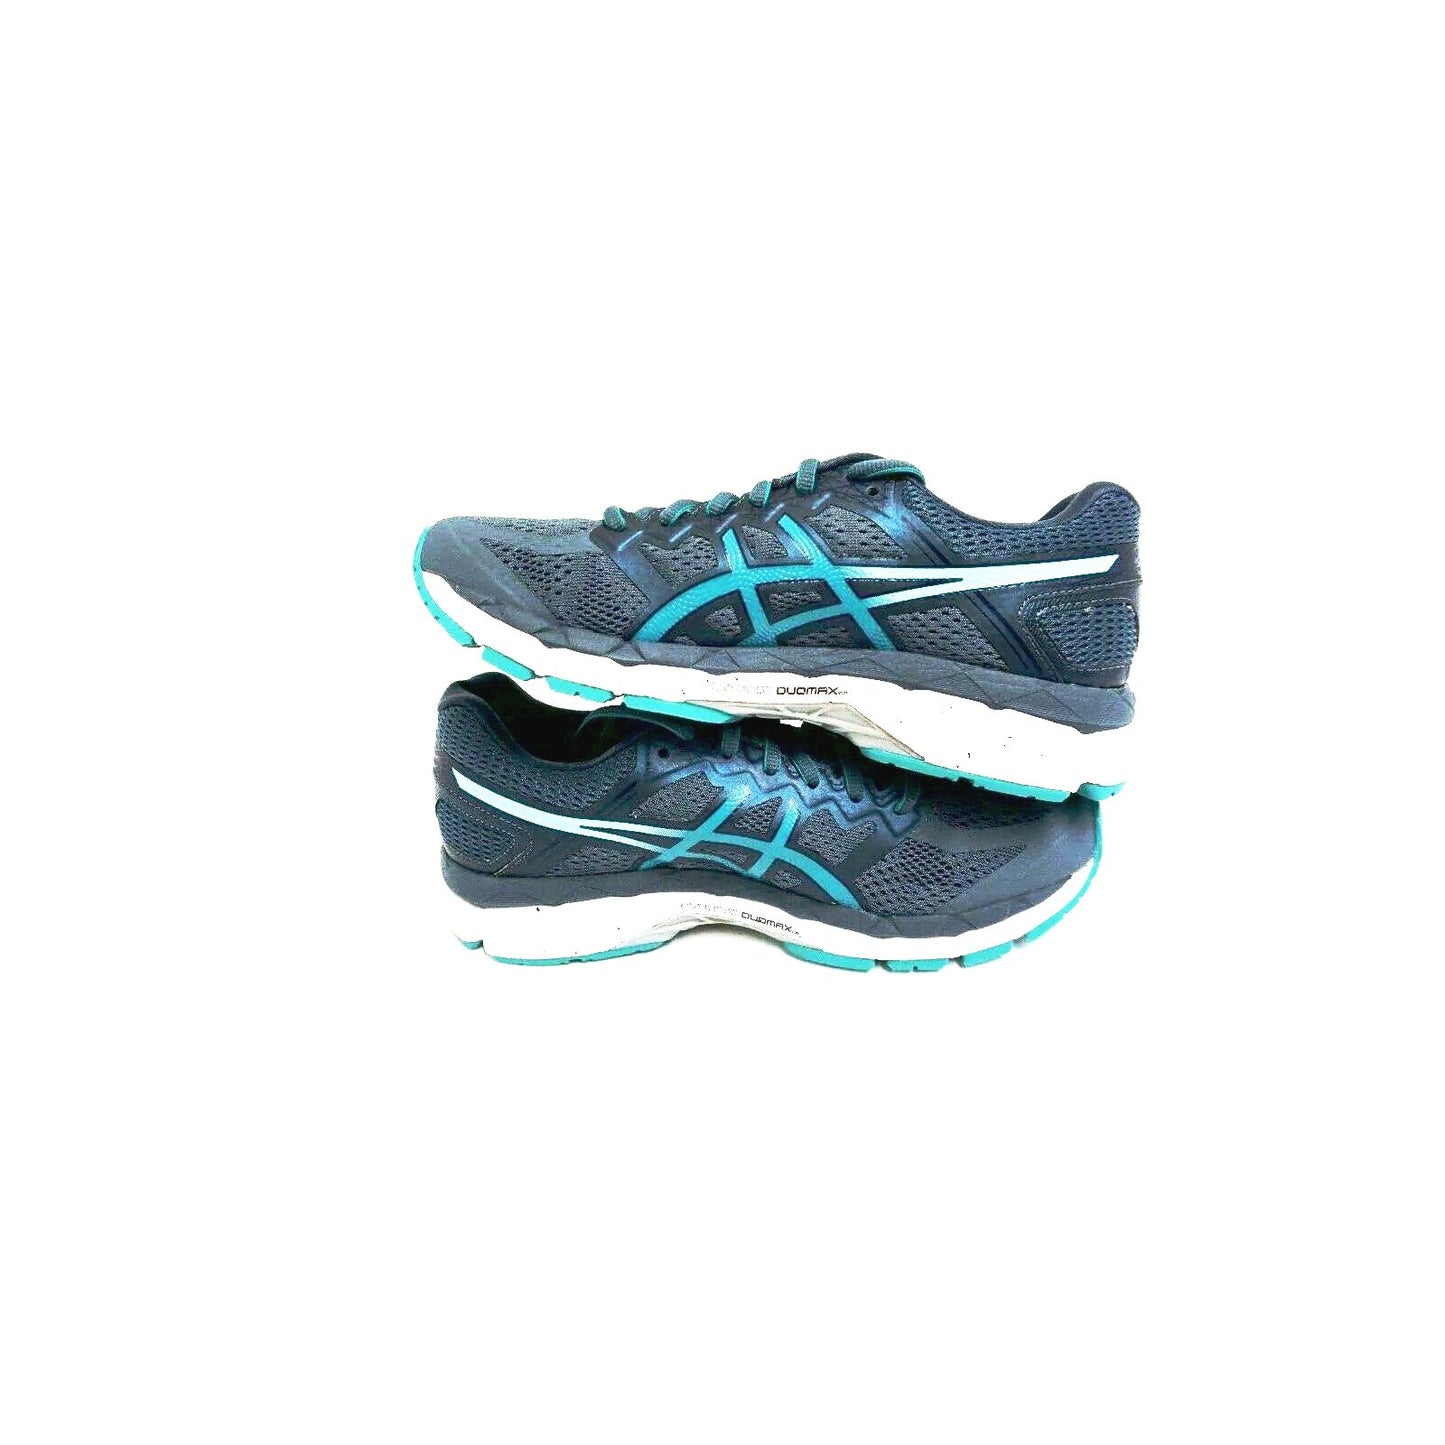 Asics women's gel-superion smoke blue running shoes size 8 us new